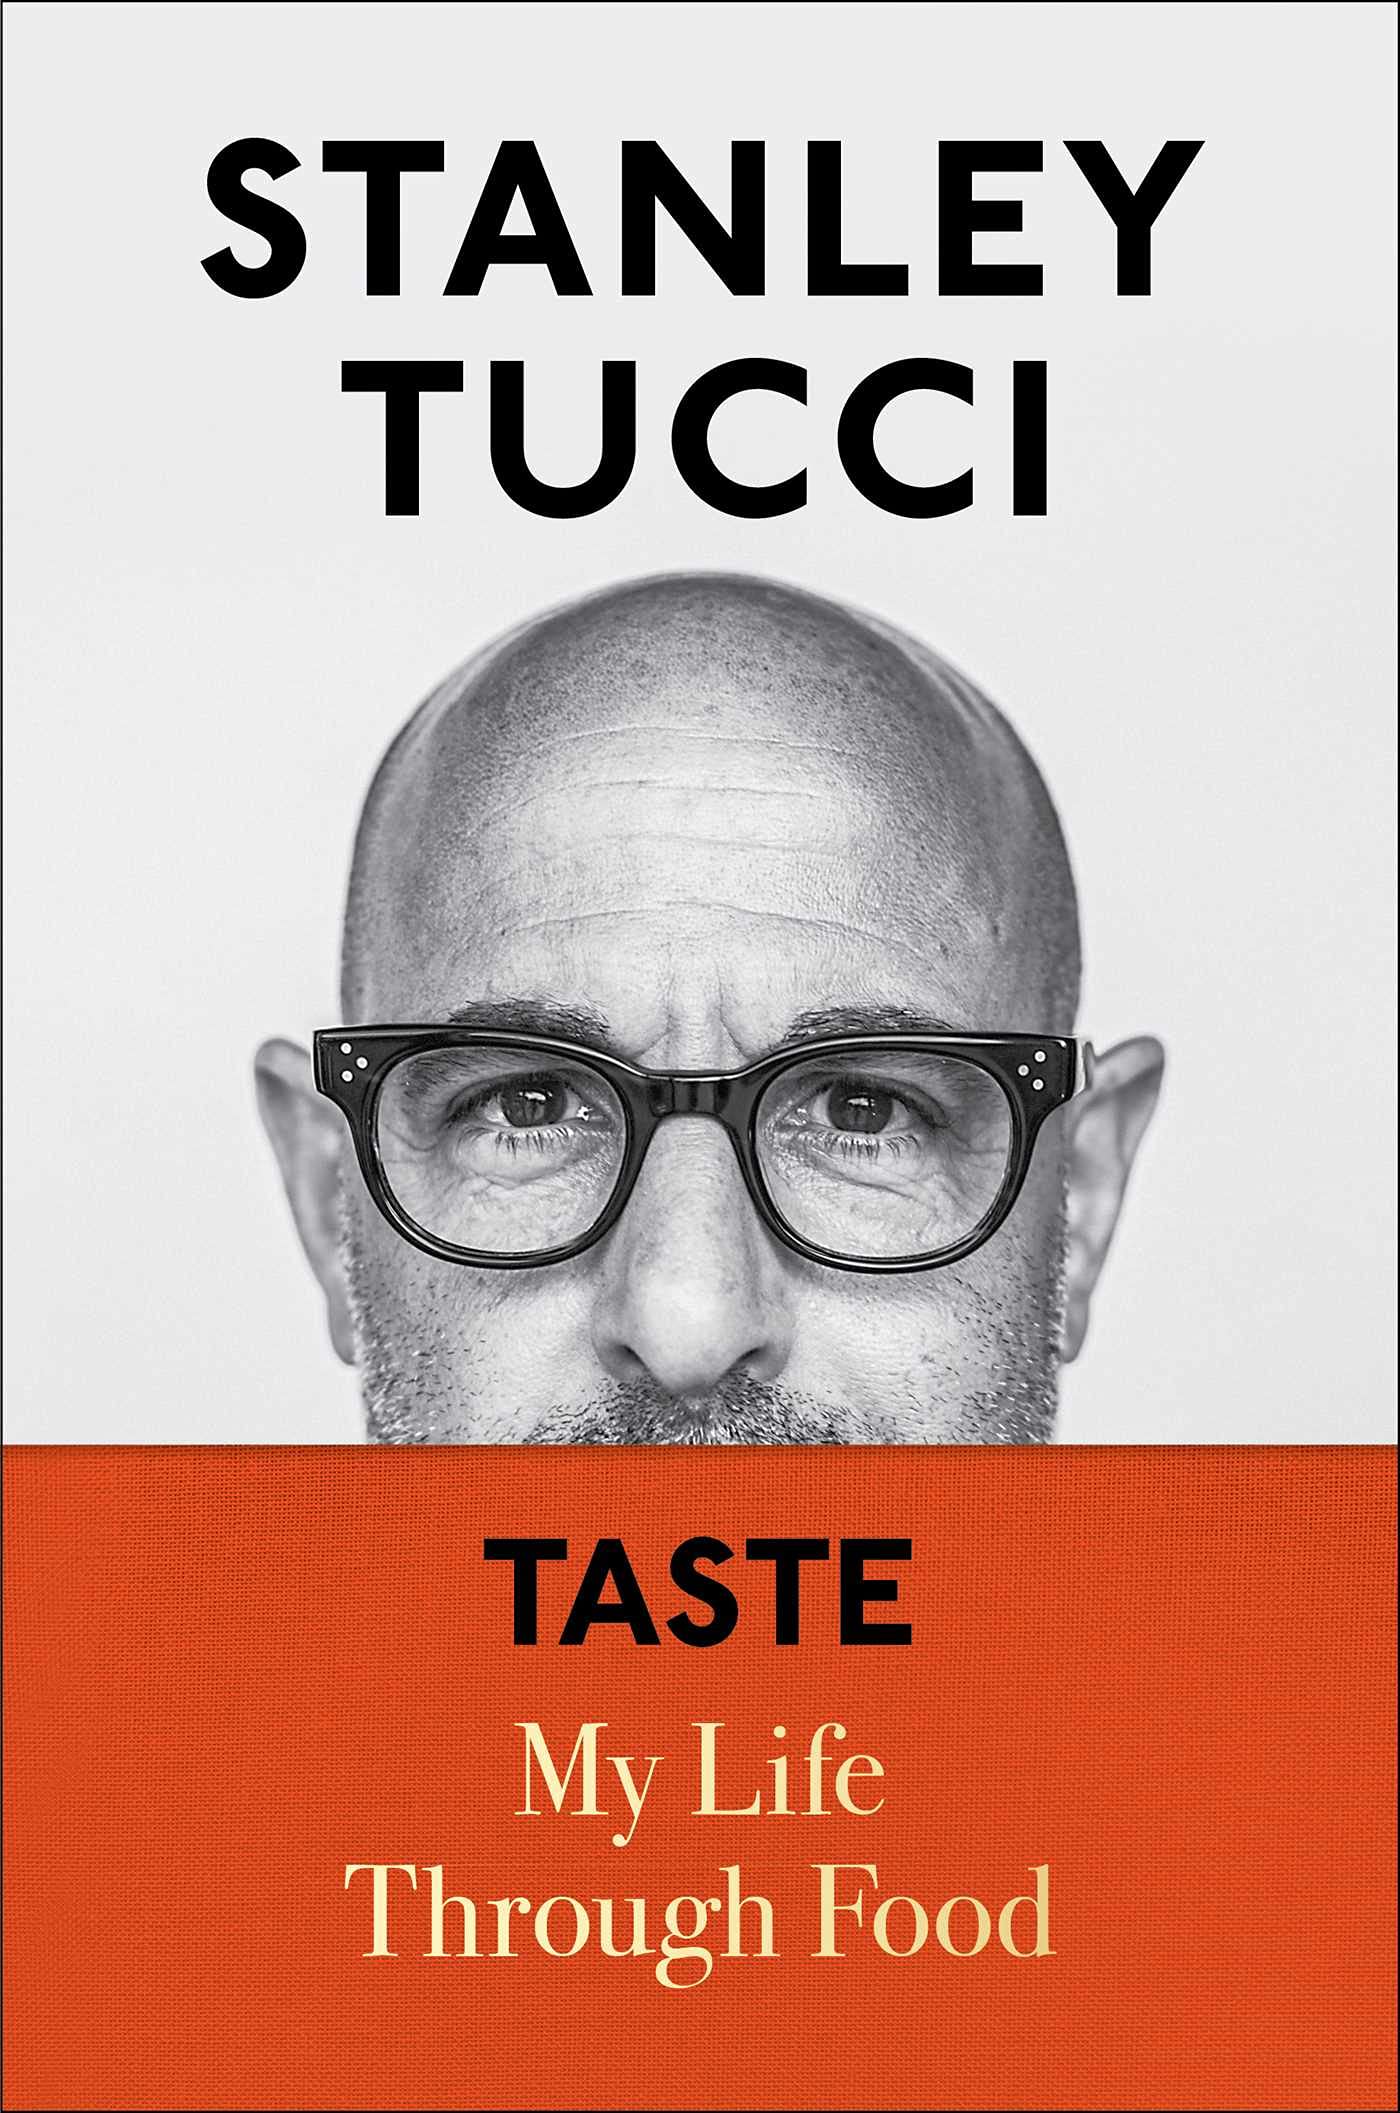 Taste: My Life Through Food (Stanley Tucci) *Signed*